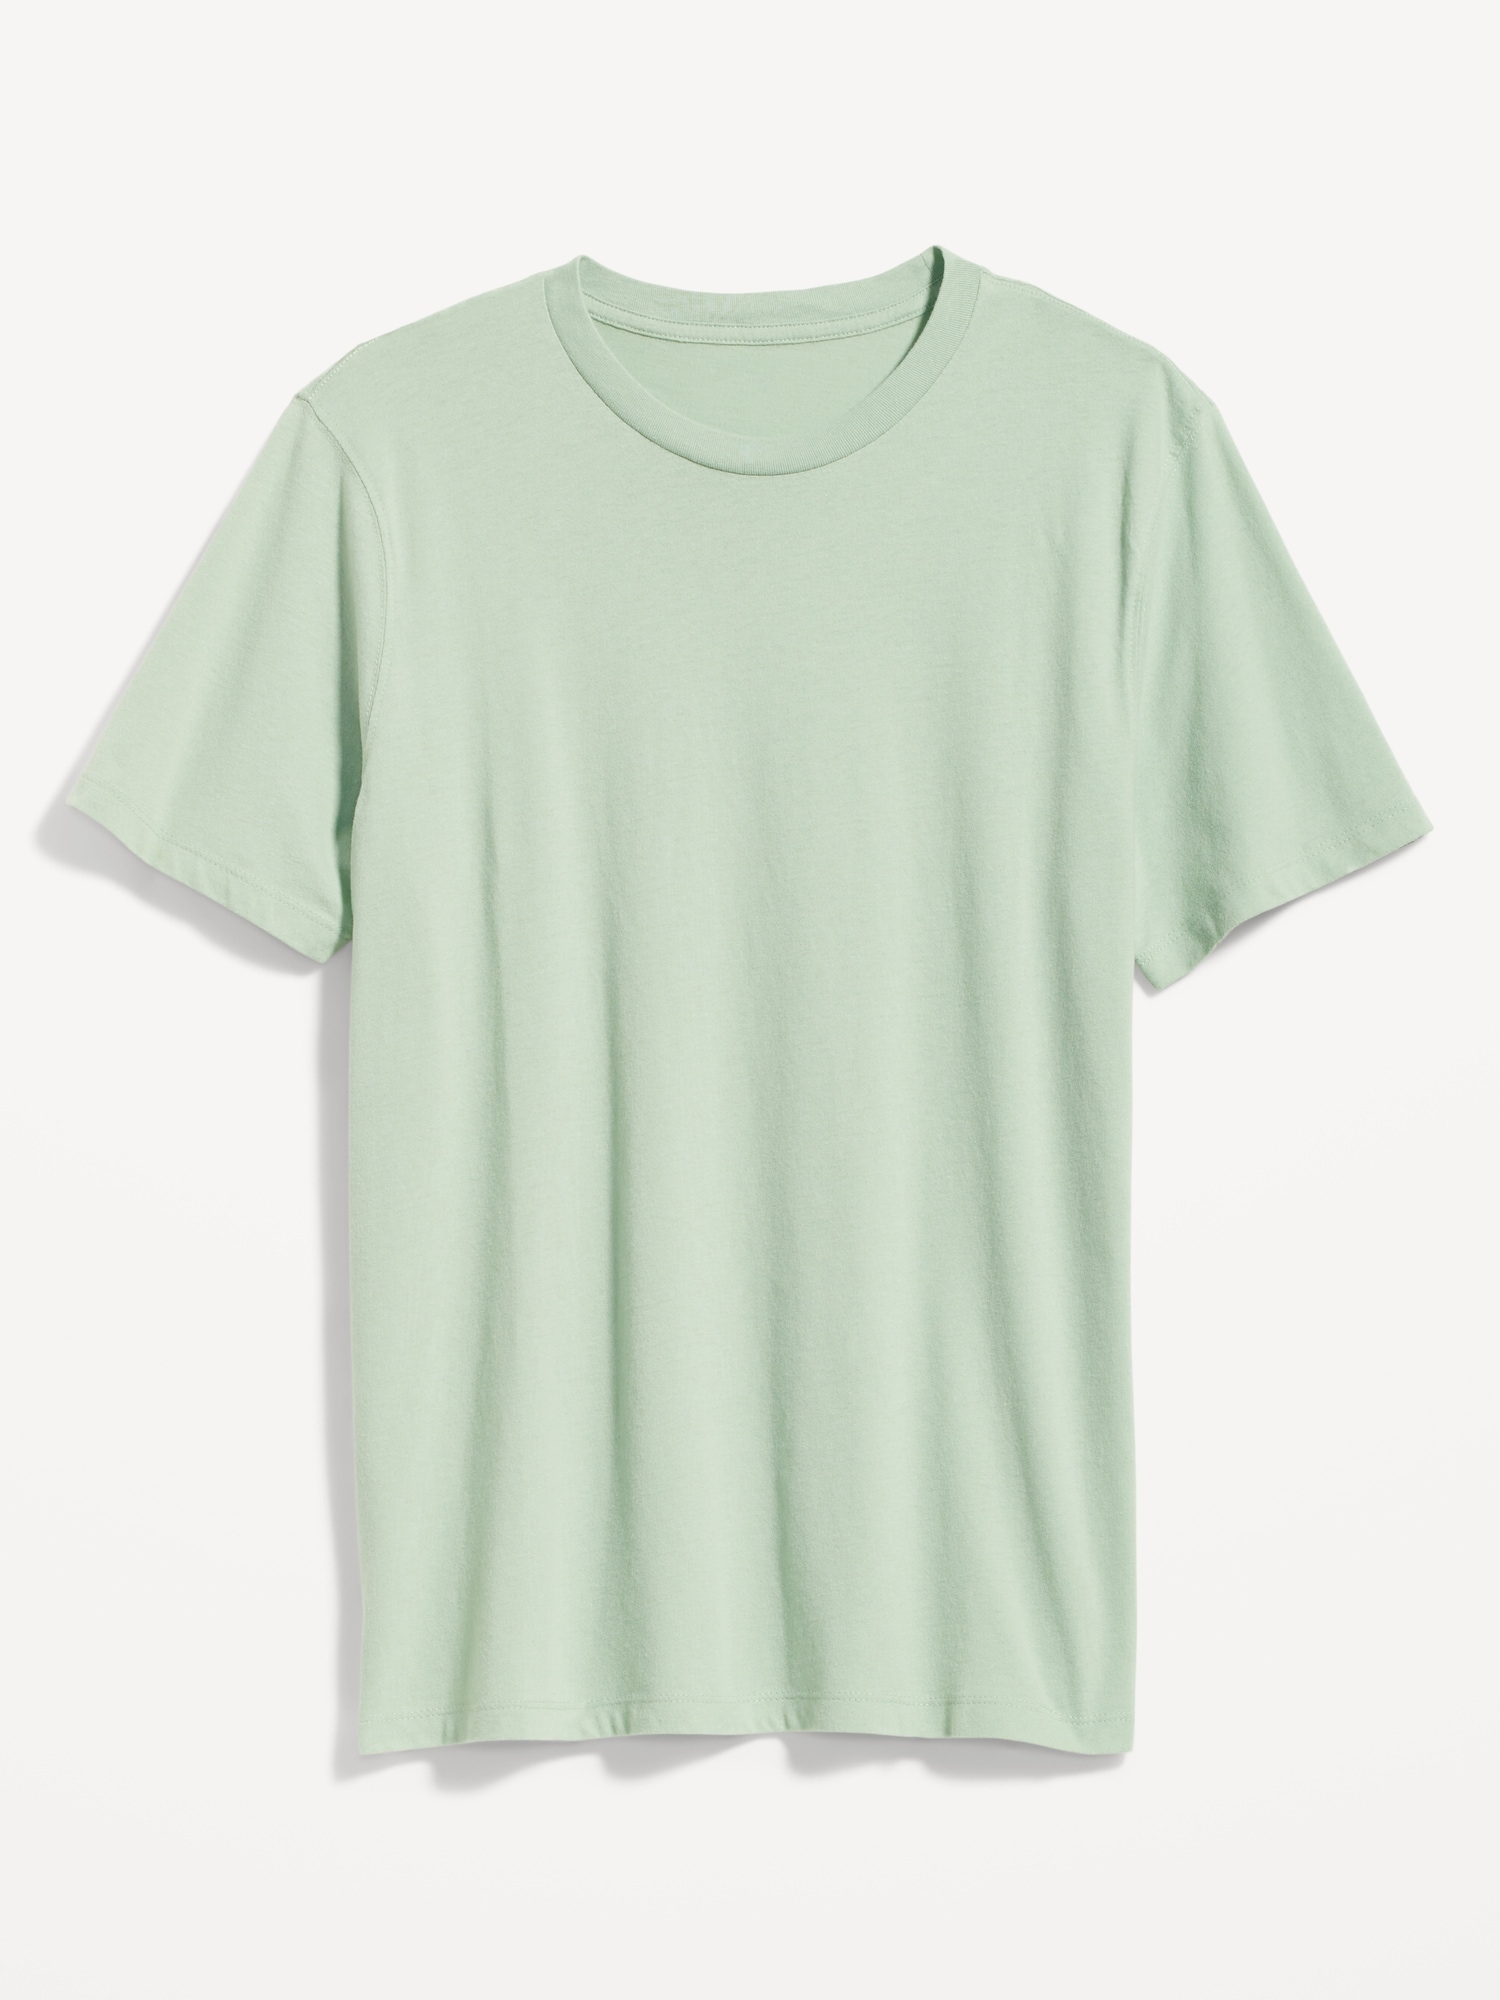 Old Navy Soft-Washed Crew-Neck T-Shirt for Men green. 1